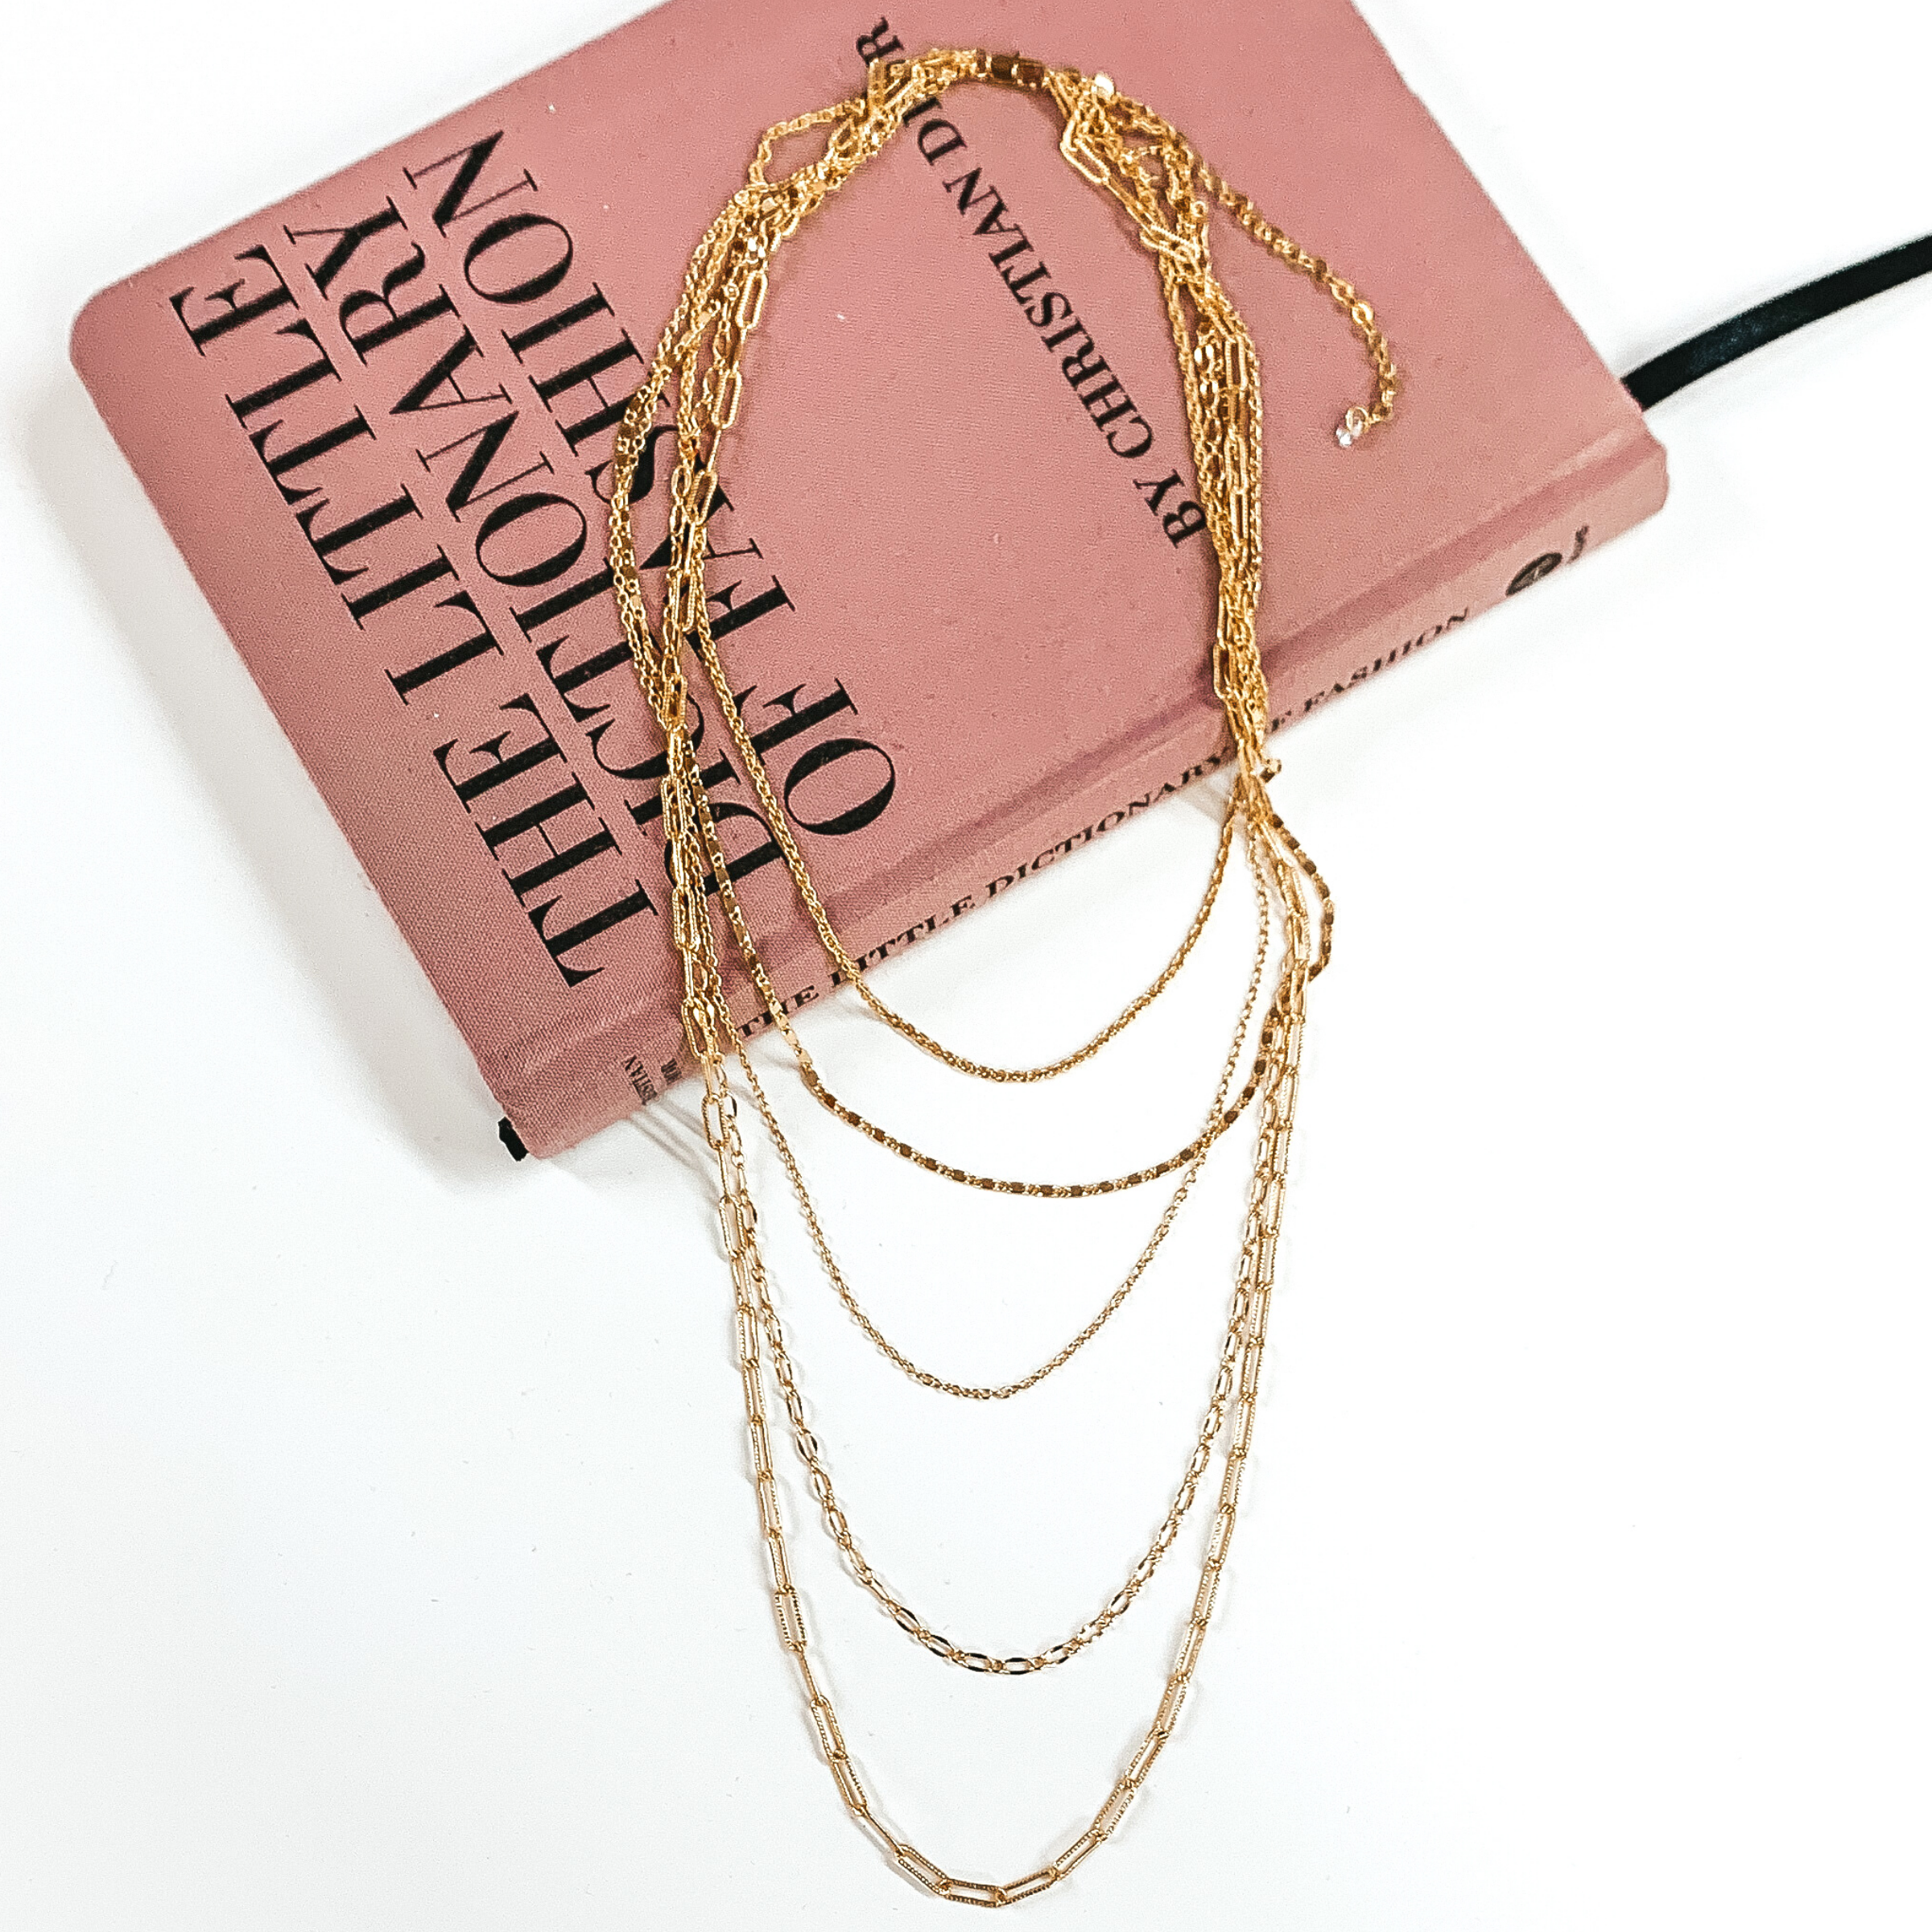 5 layered gold multi chained necklace. This necklace is pictured laying partially on a mauve colored book on a white background. 